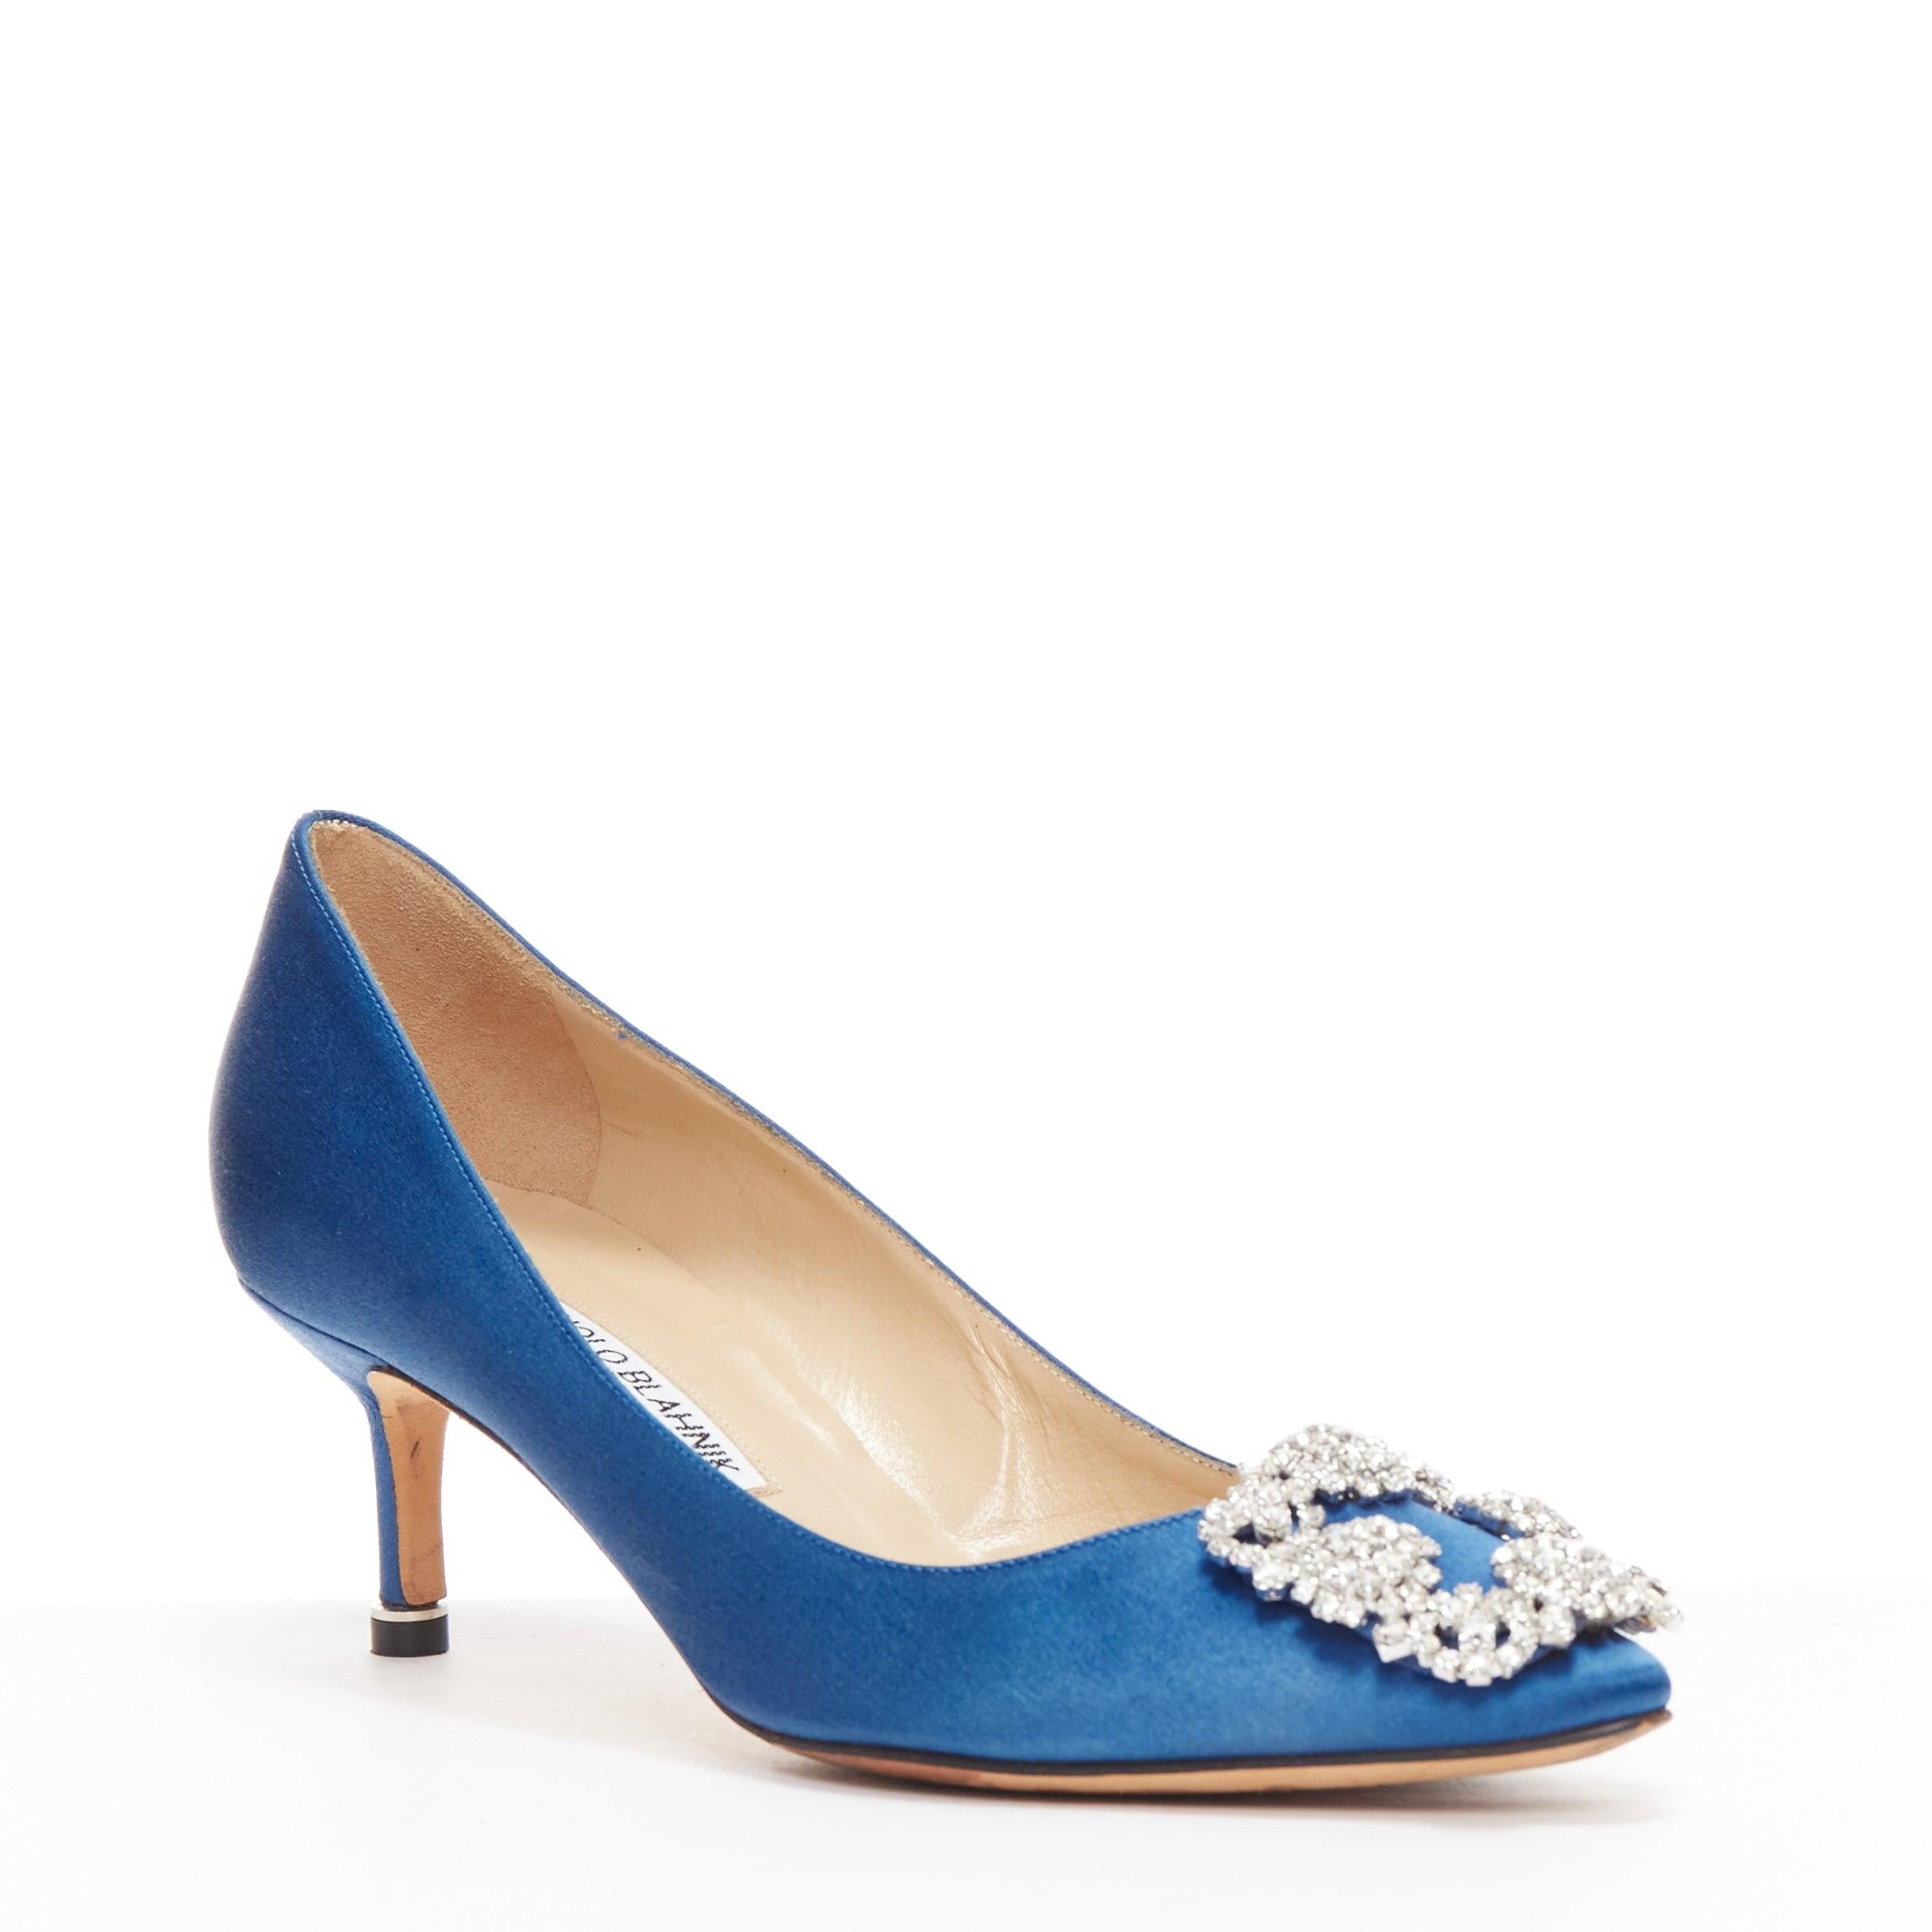 MANOLO BLAHNIK Hangisi 50 blue satin crystal buckle teacup heeled pumps EU36.5
Reference: KYCG/A00043
Brand: Manolo Blahnik
Model: Hangisi 50
Material: Satin
Color: Silver, Blue
Pattern: Crystals
Closure: Slip On
Lining: Nude Leather
Made in: